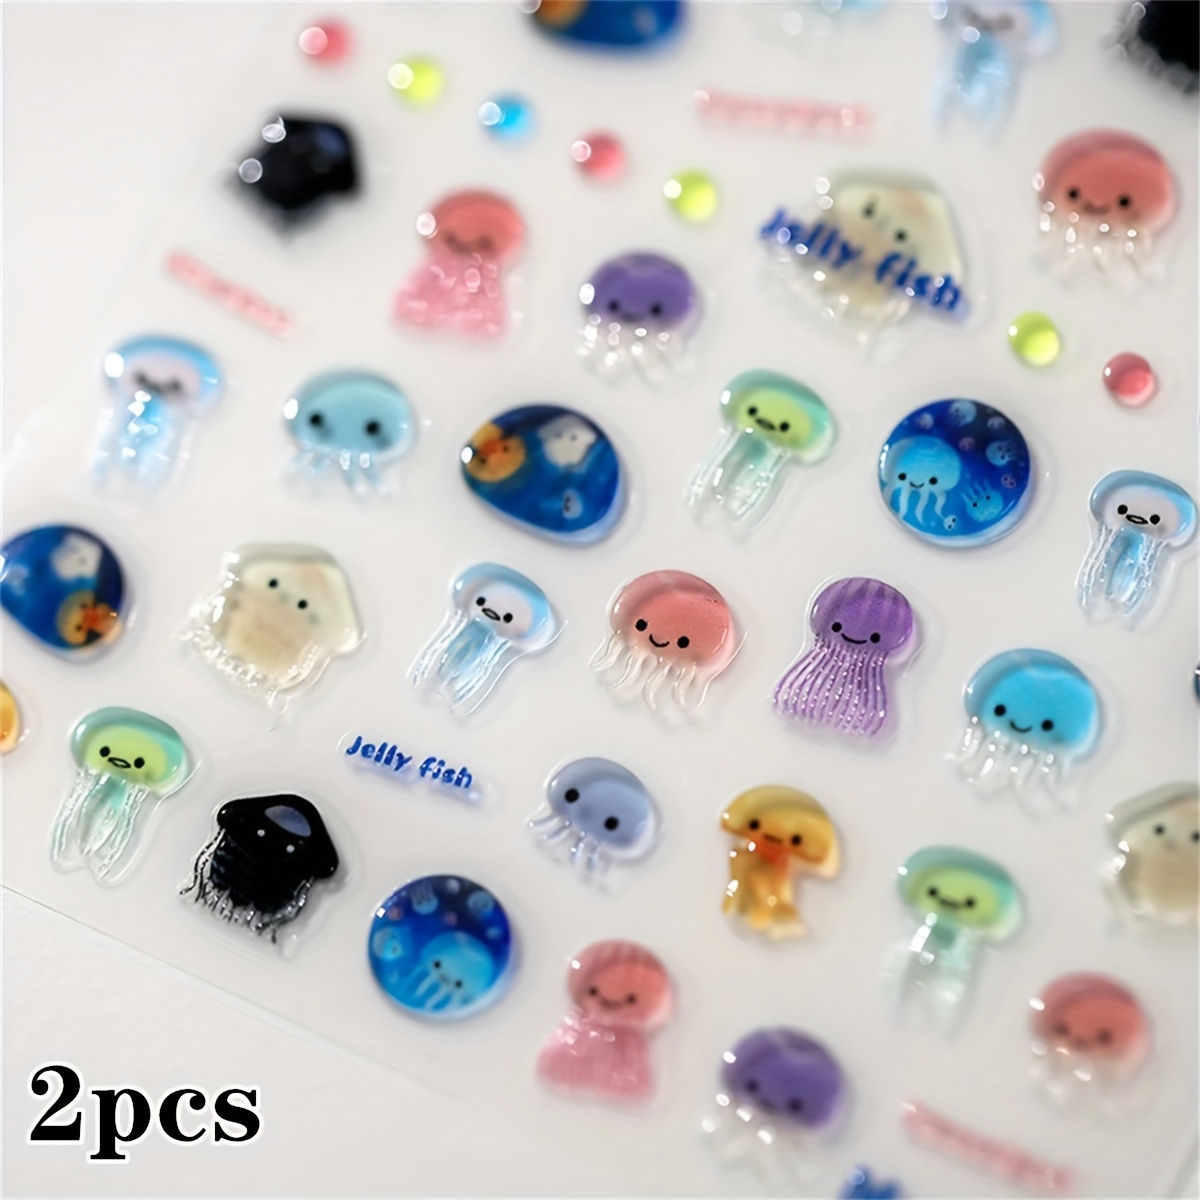 

1pc 5d Kawaii Jellyfish Design Nail Art Stickers, Blue Jelly Vinyl Nail Art Decal Transfer For Manicure Decoration Ocean Style